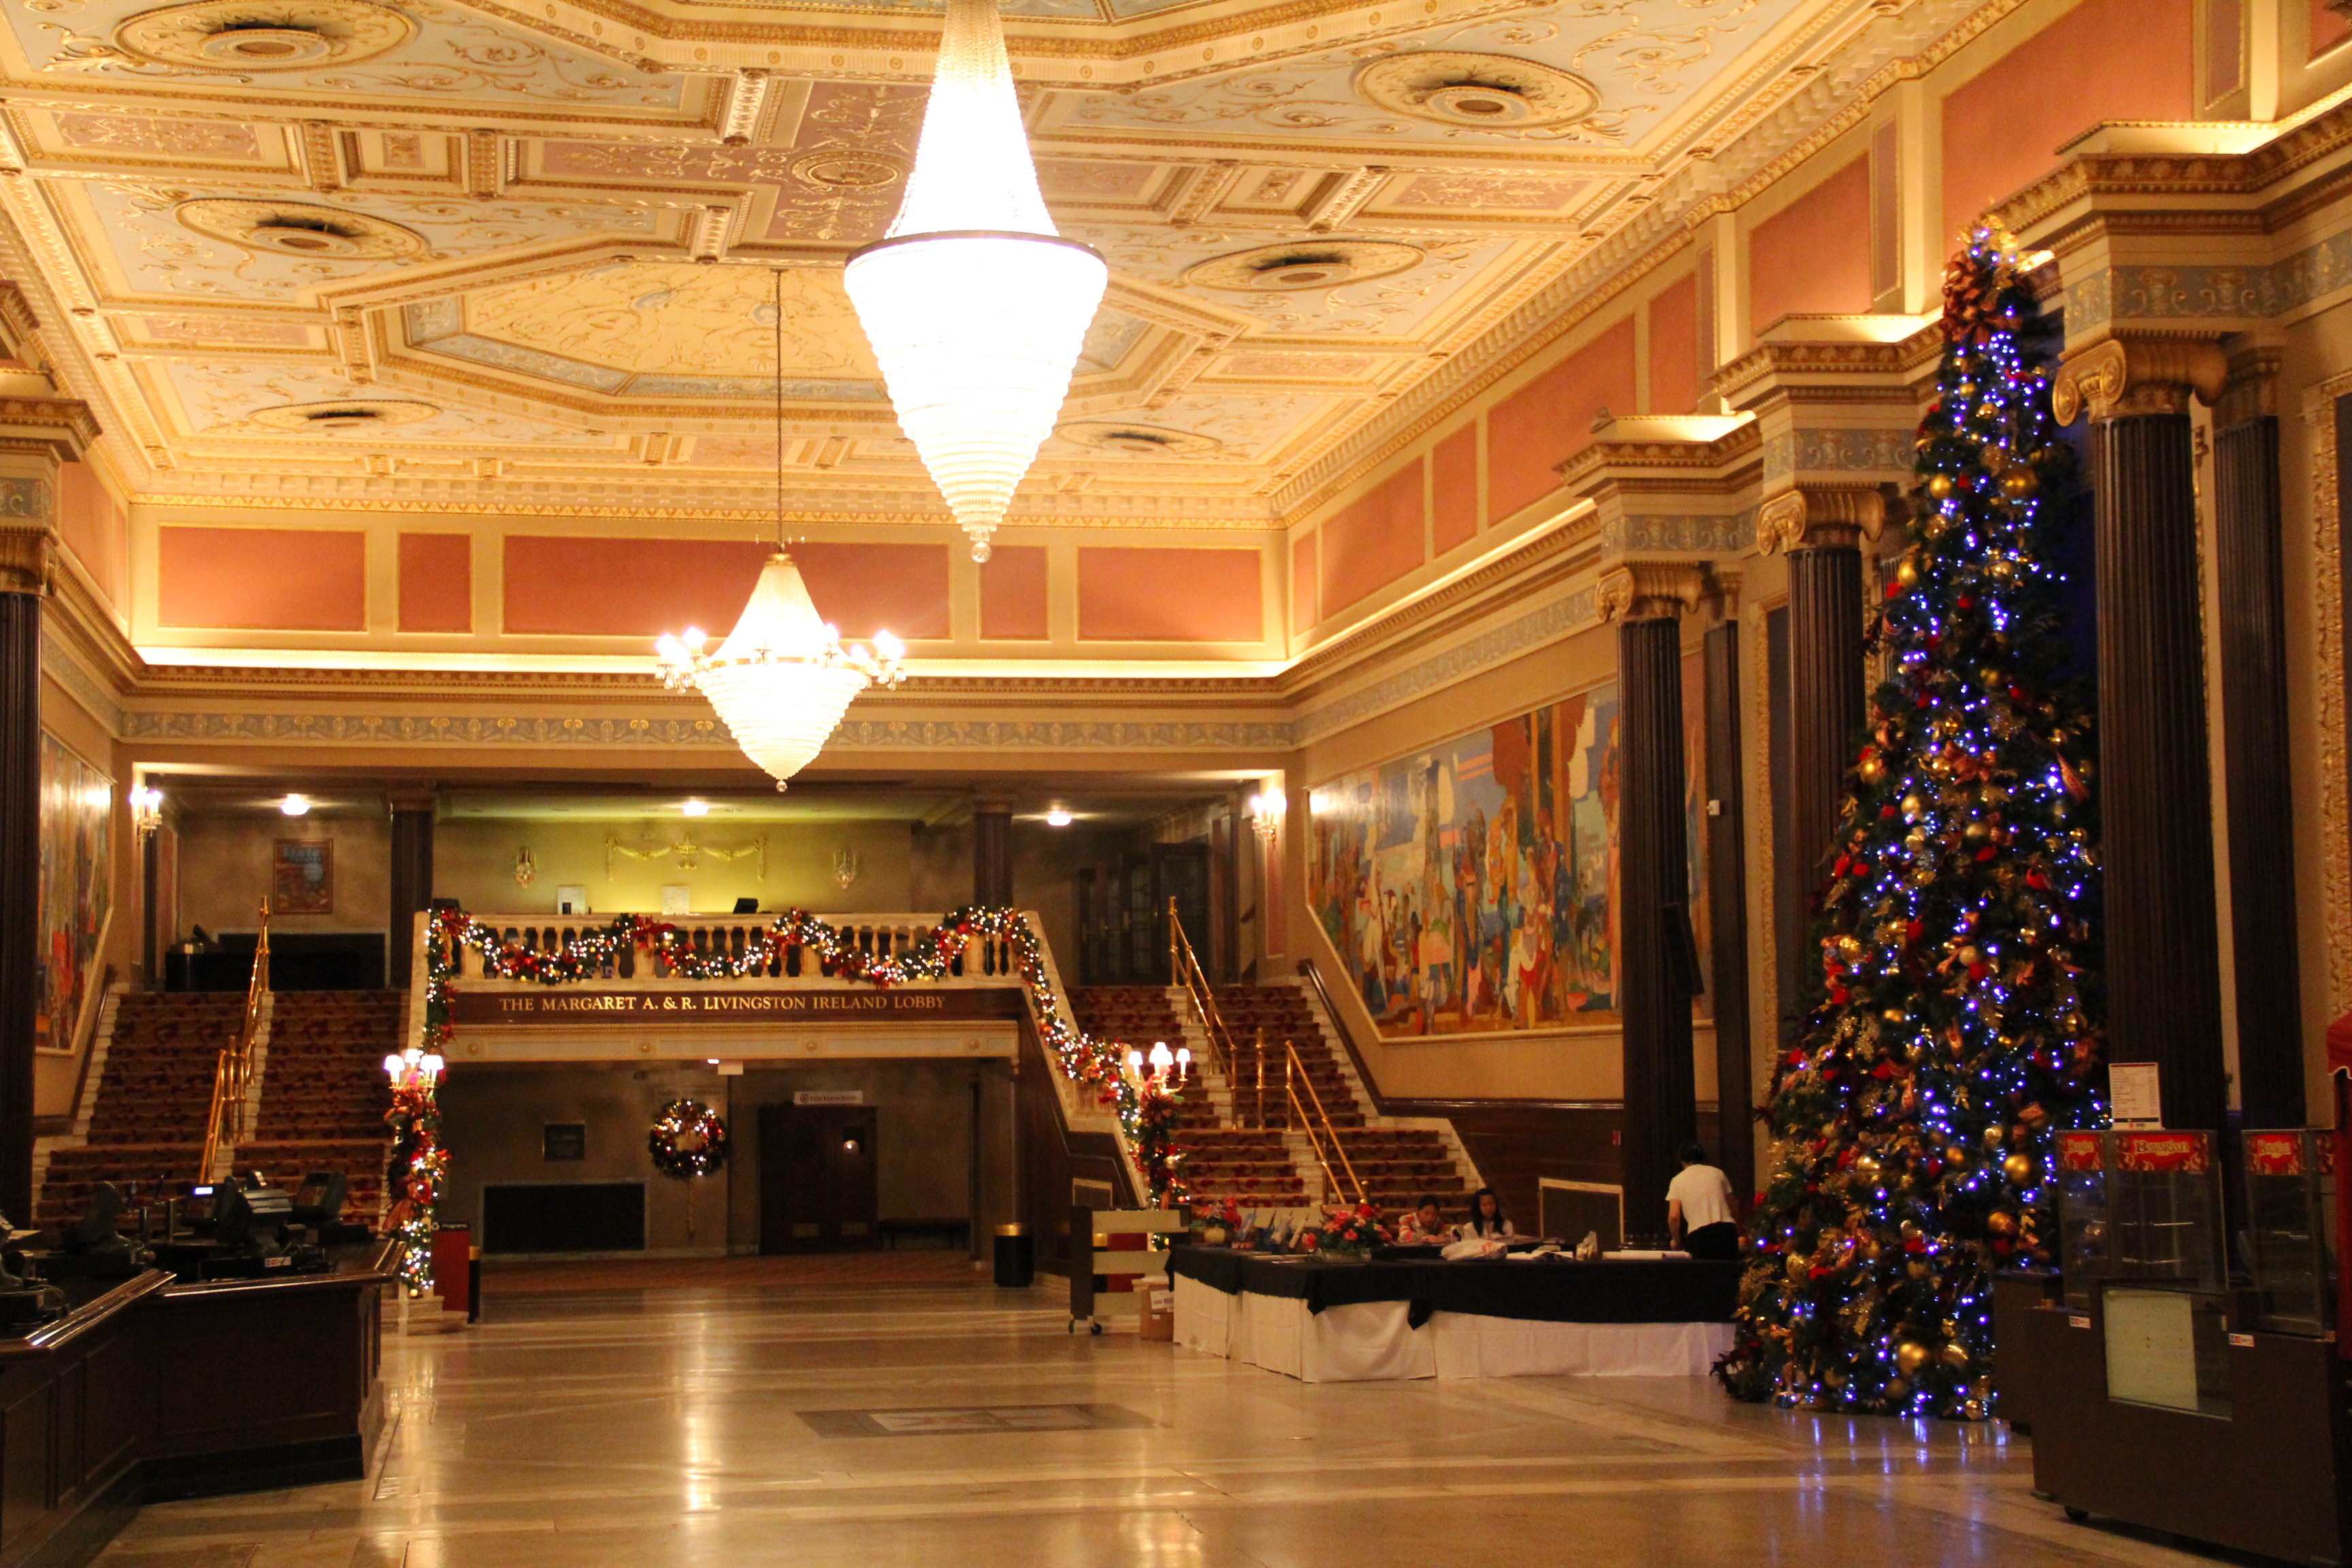 The lobby of Cleveland, State Theatre of Ohio, where Shen Yun Touring Company will be performing.